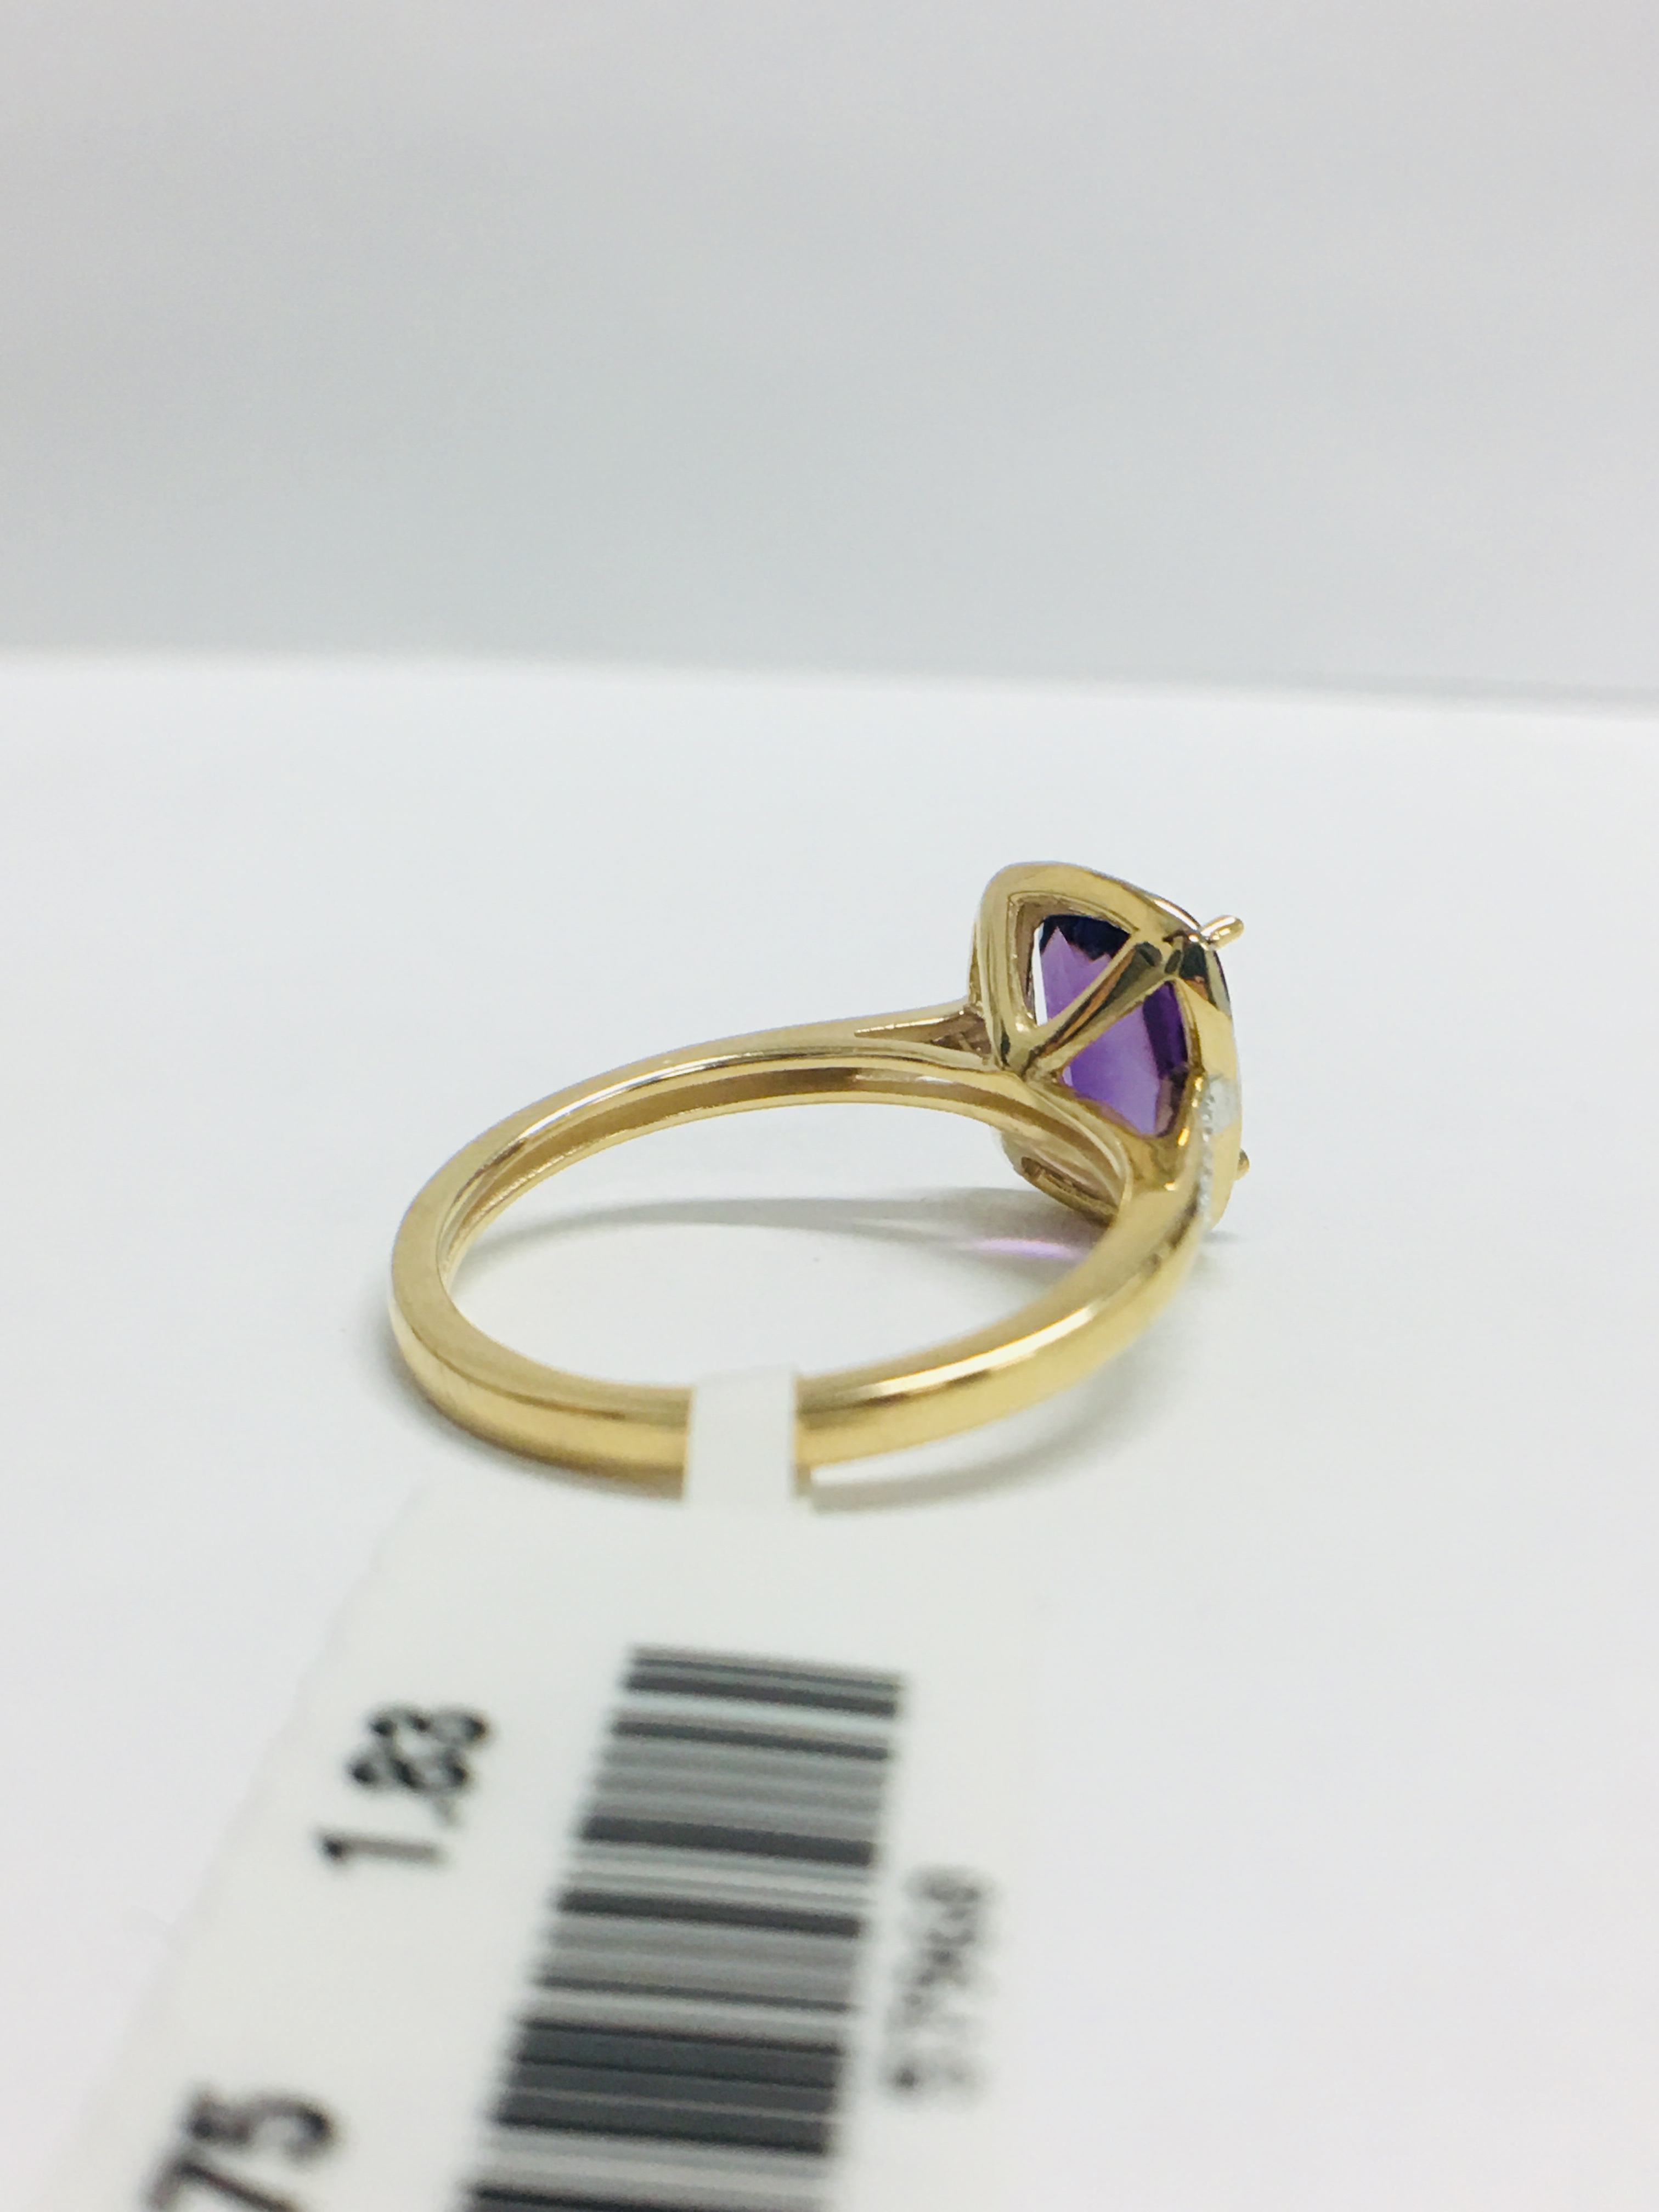 9ct yellow gold Amethyst and diamond ring - Image 6 of 11